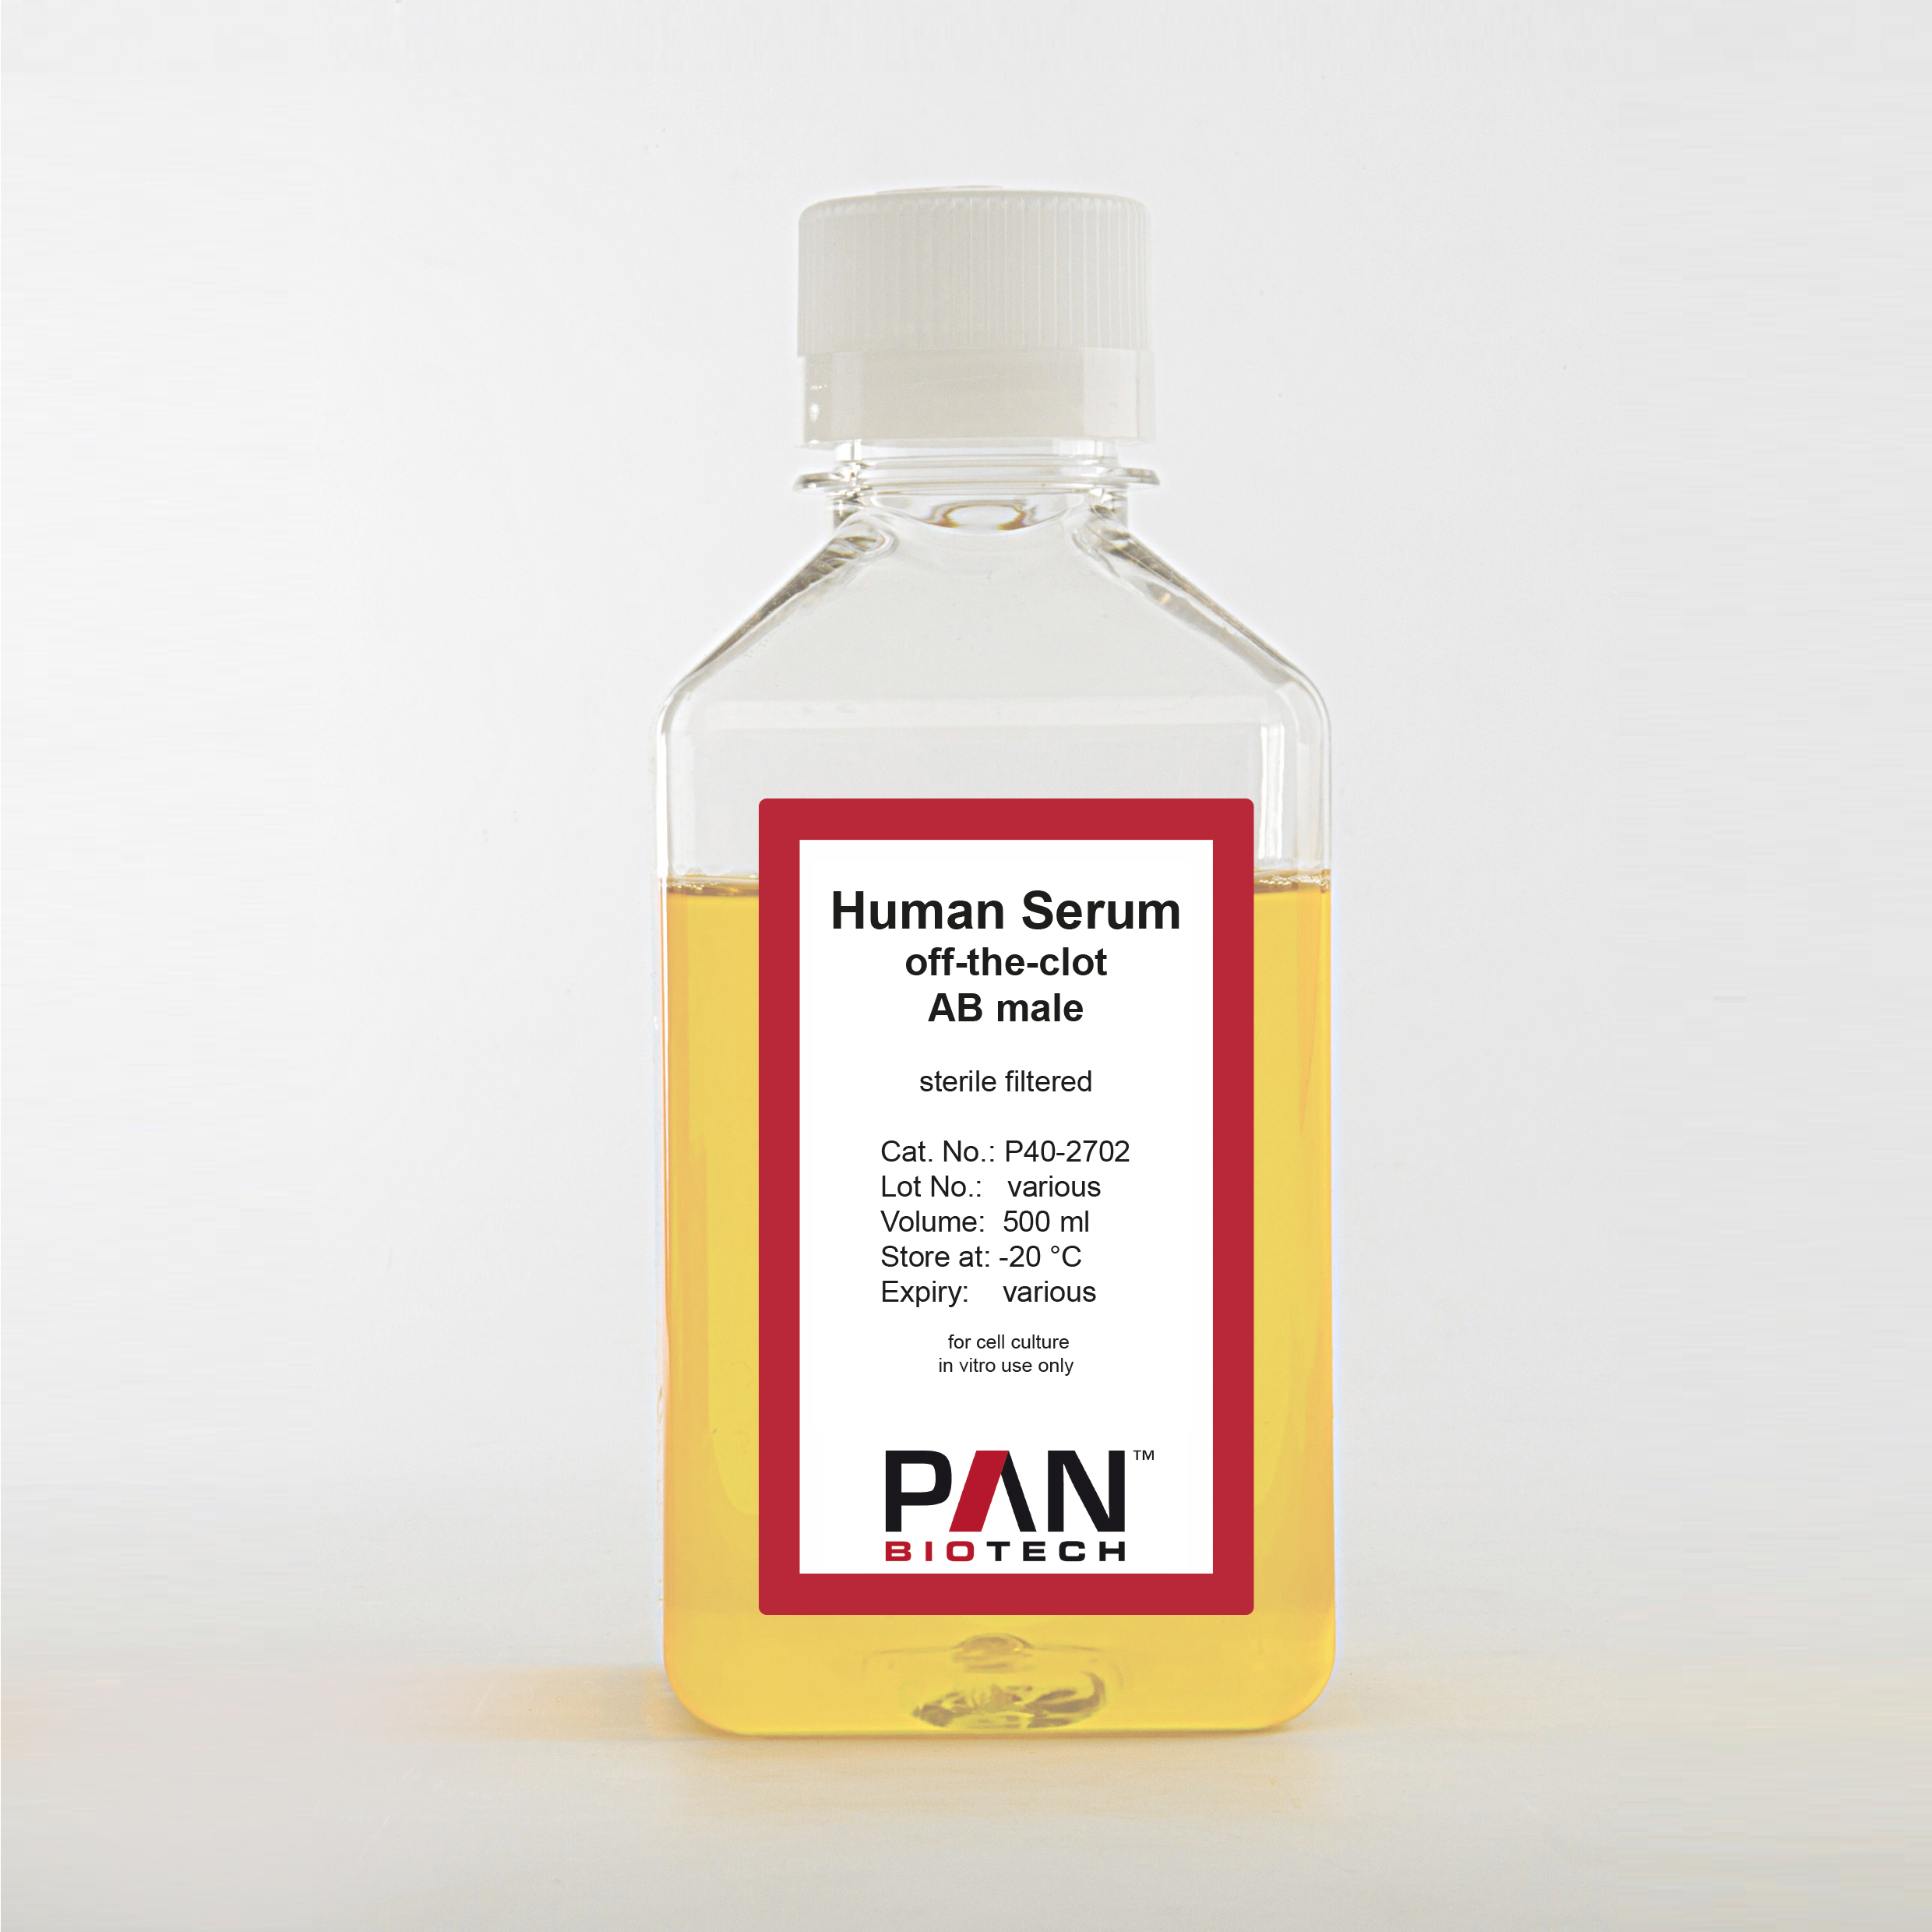 Human Serum off-the-clot, Type AB, male, sterile filtered